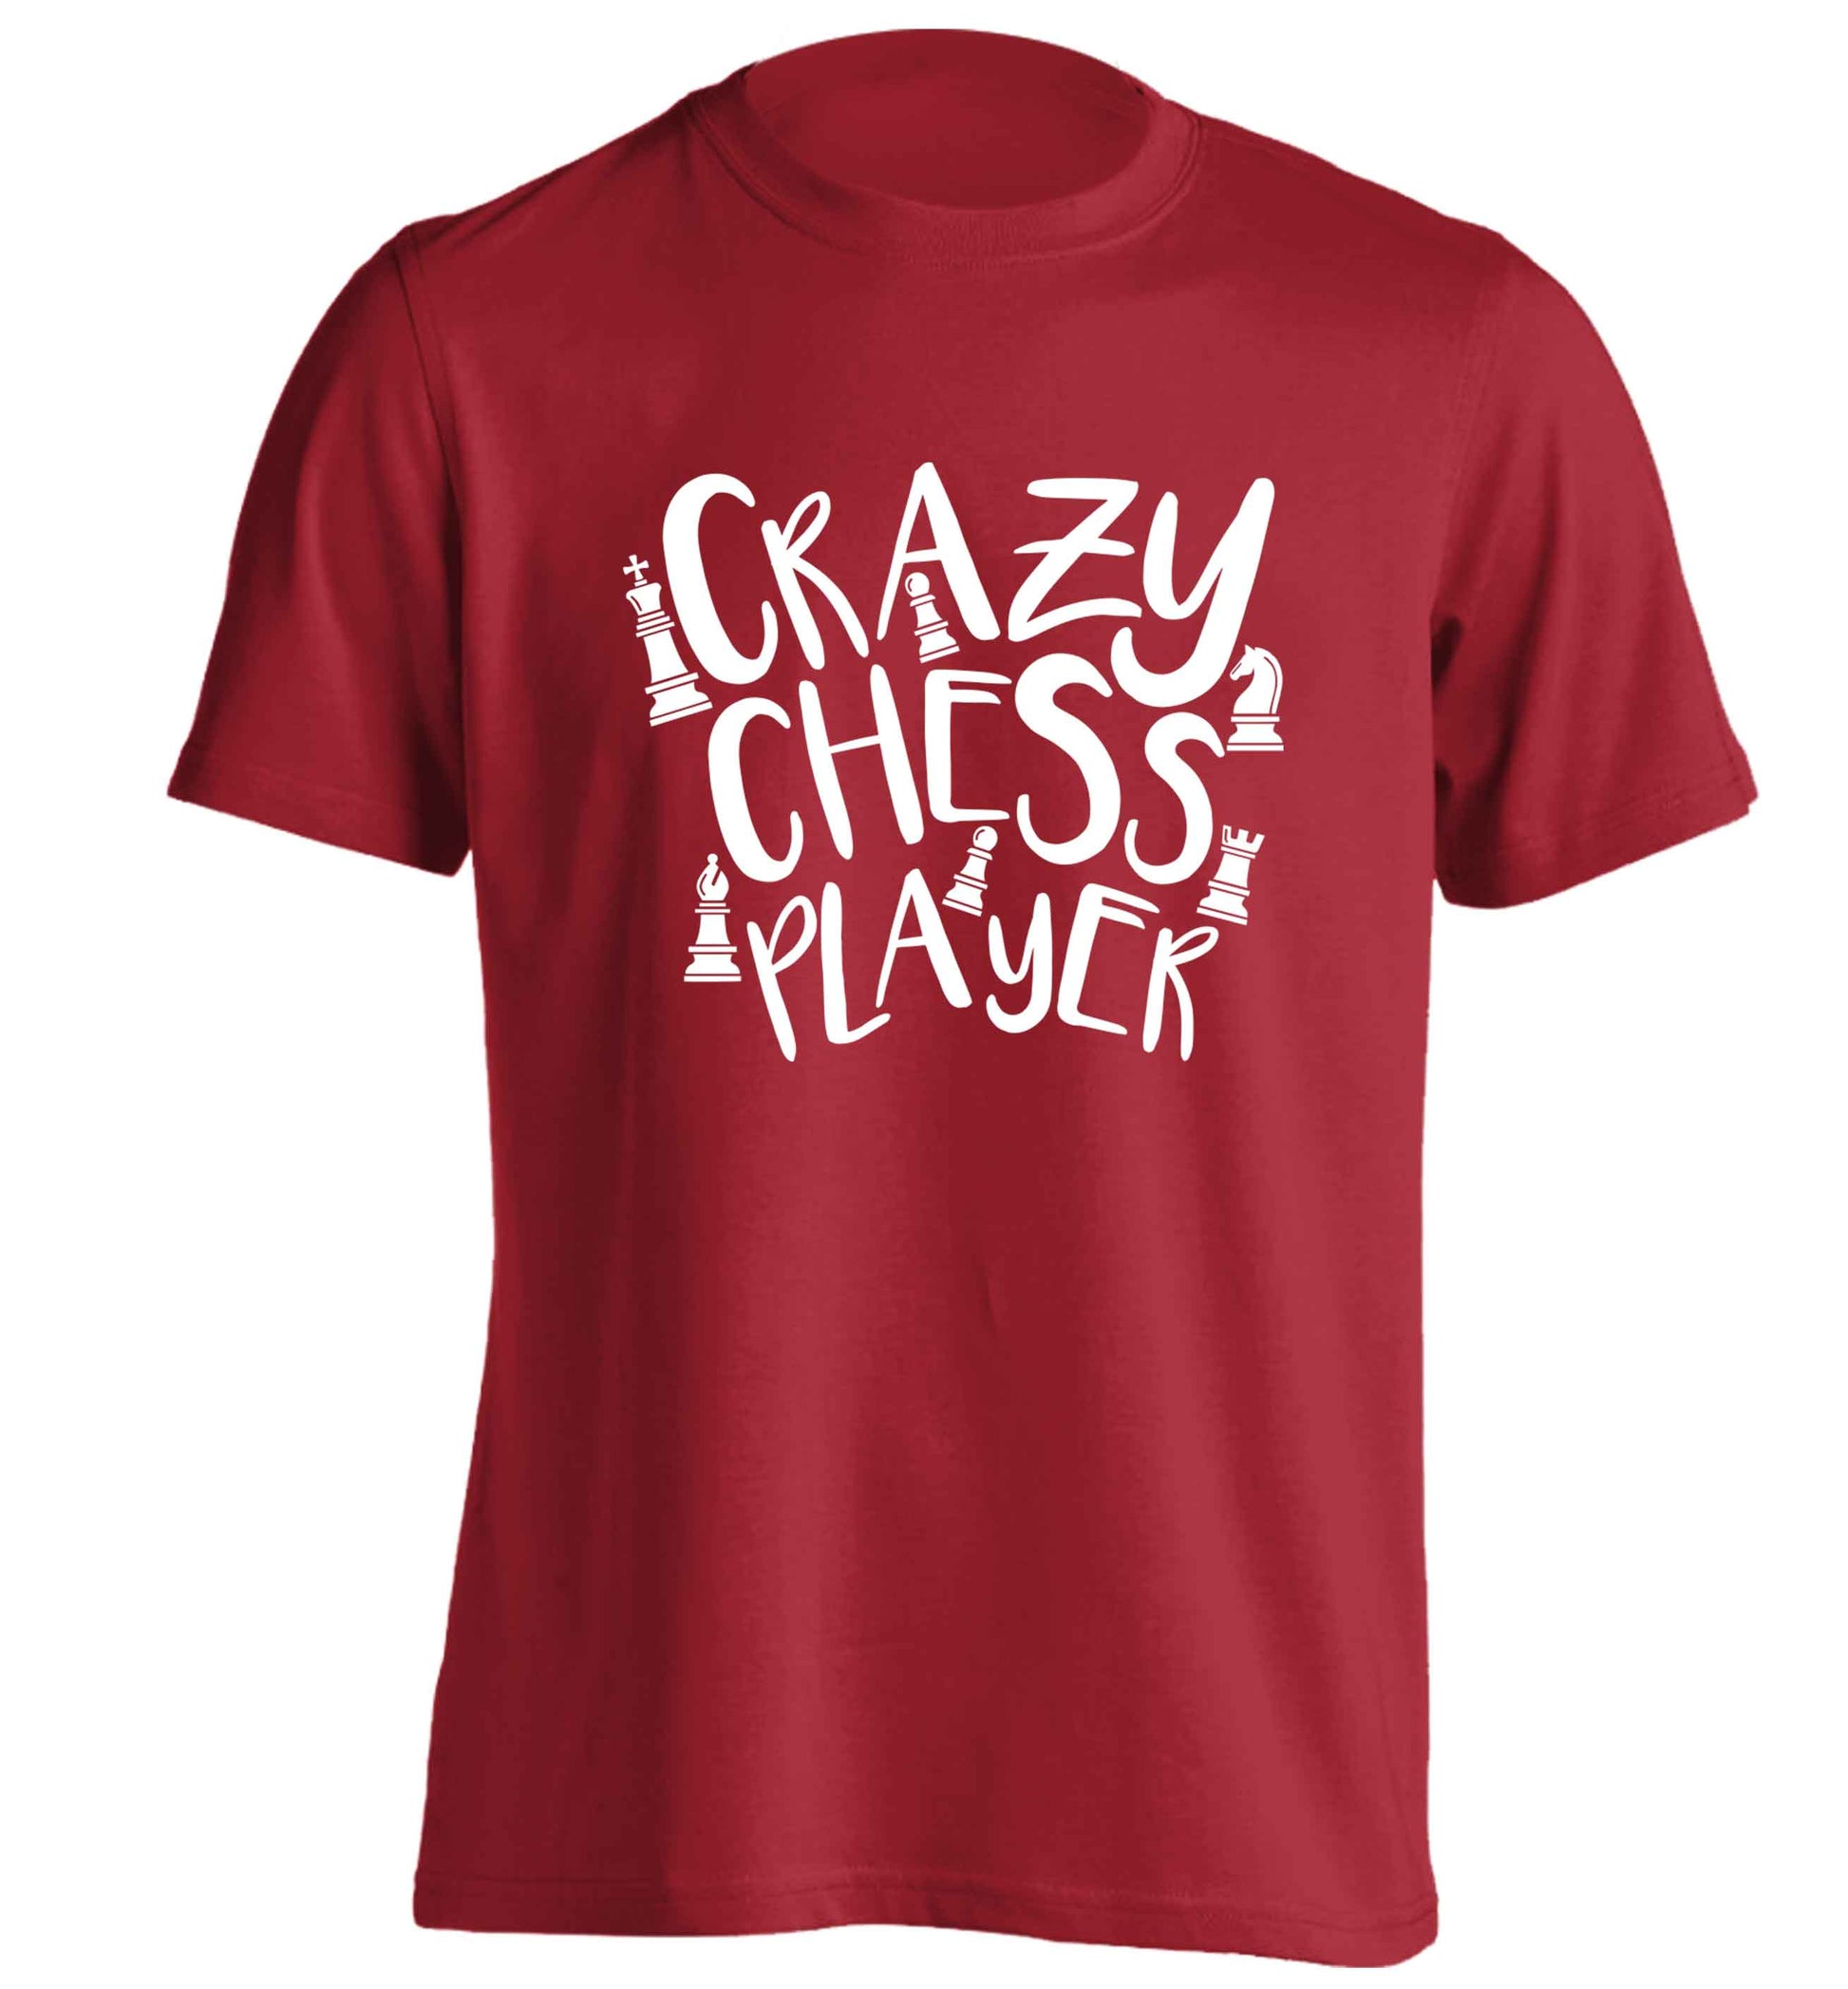 Crazy chess player adults unisex red Tshirt 2XL